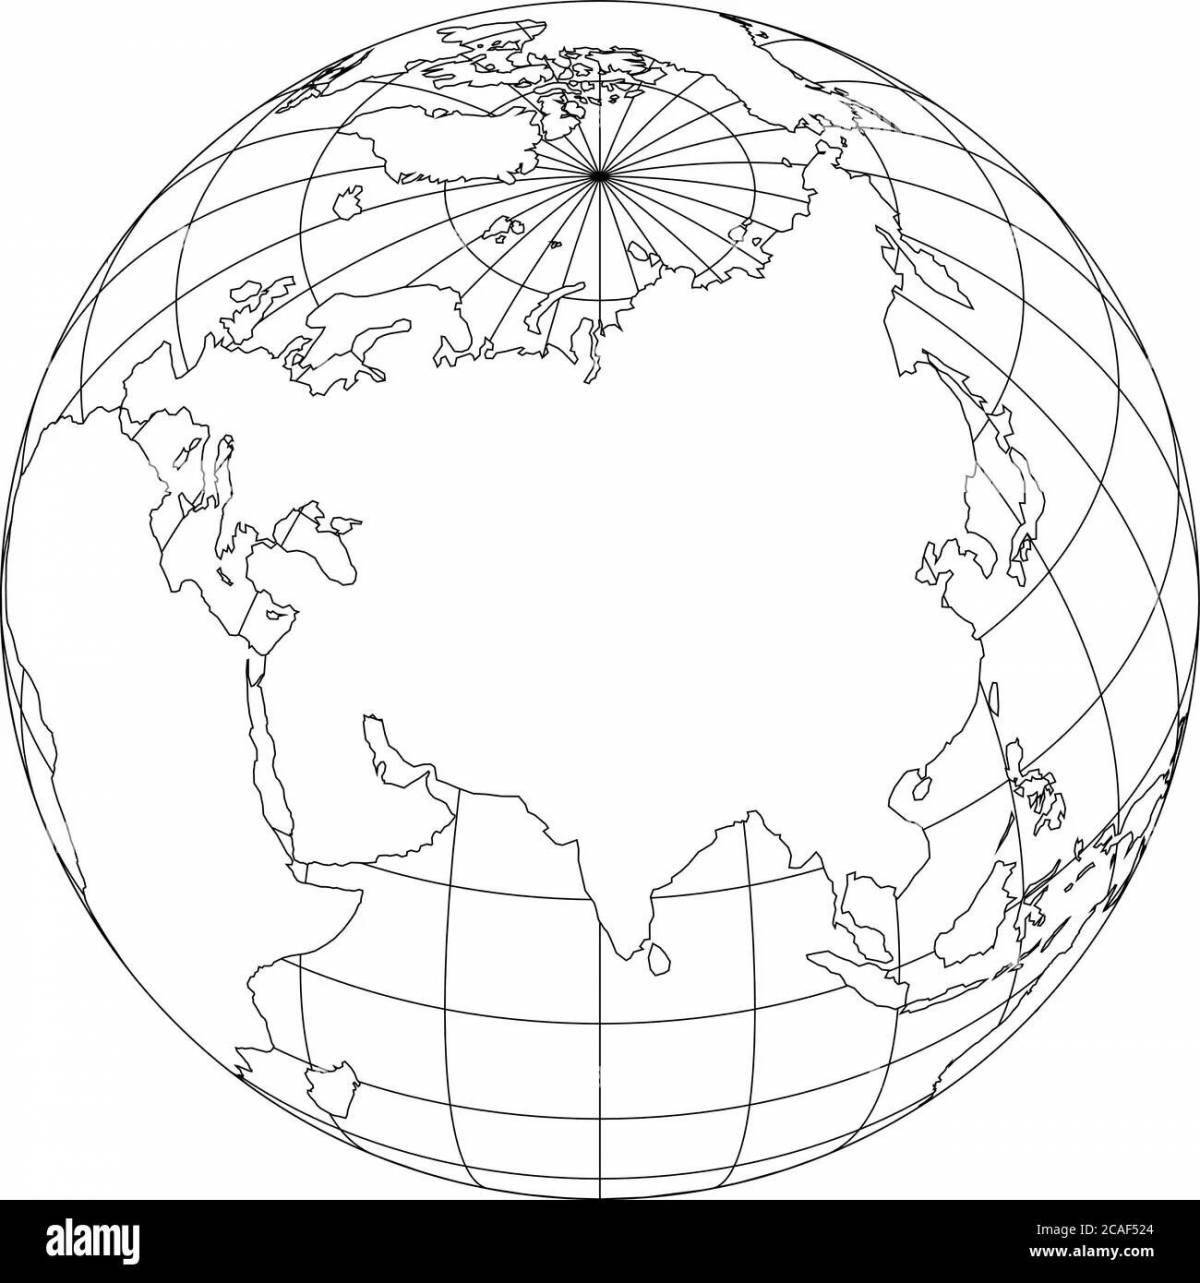 Funny globe coloring book for kids